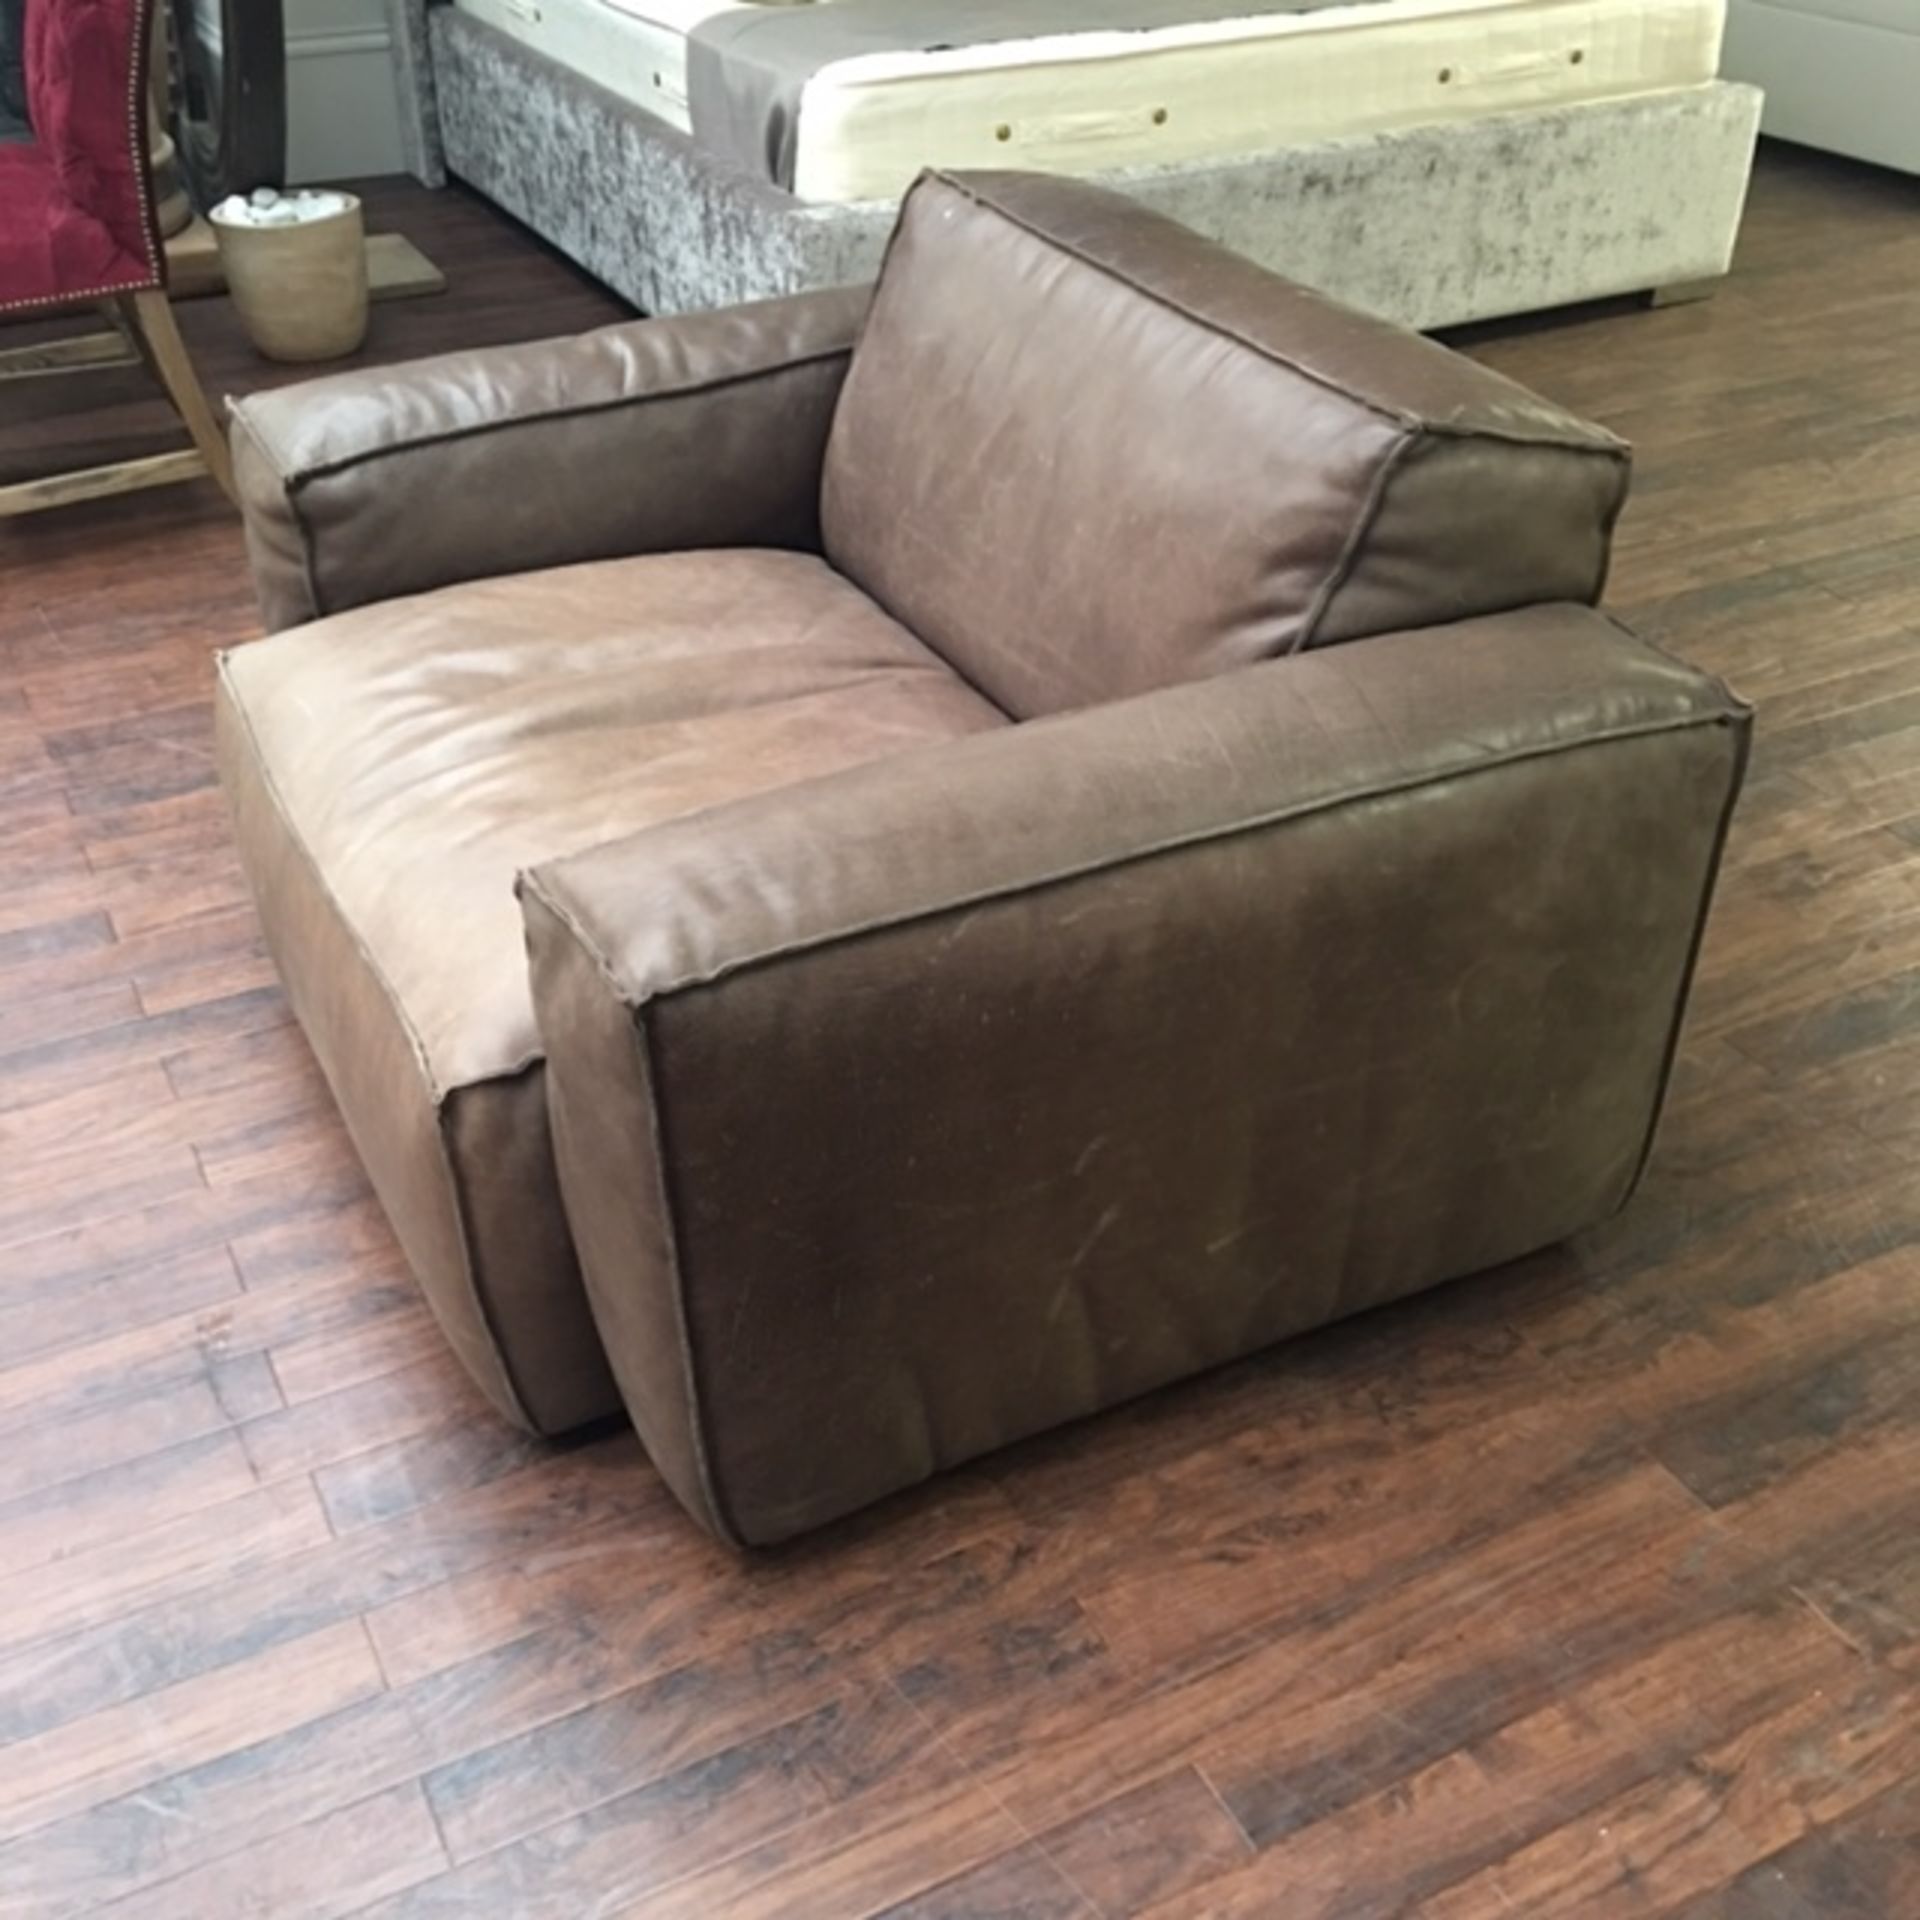 Buddy 1 Seater Sofa Sioux Charcoal Leather 108 L X 101 W X 67 H Cm (1972/Tstock) RRP £1900